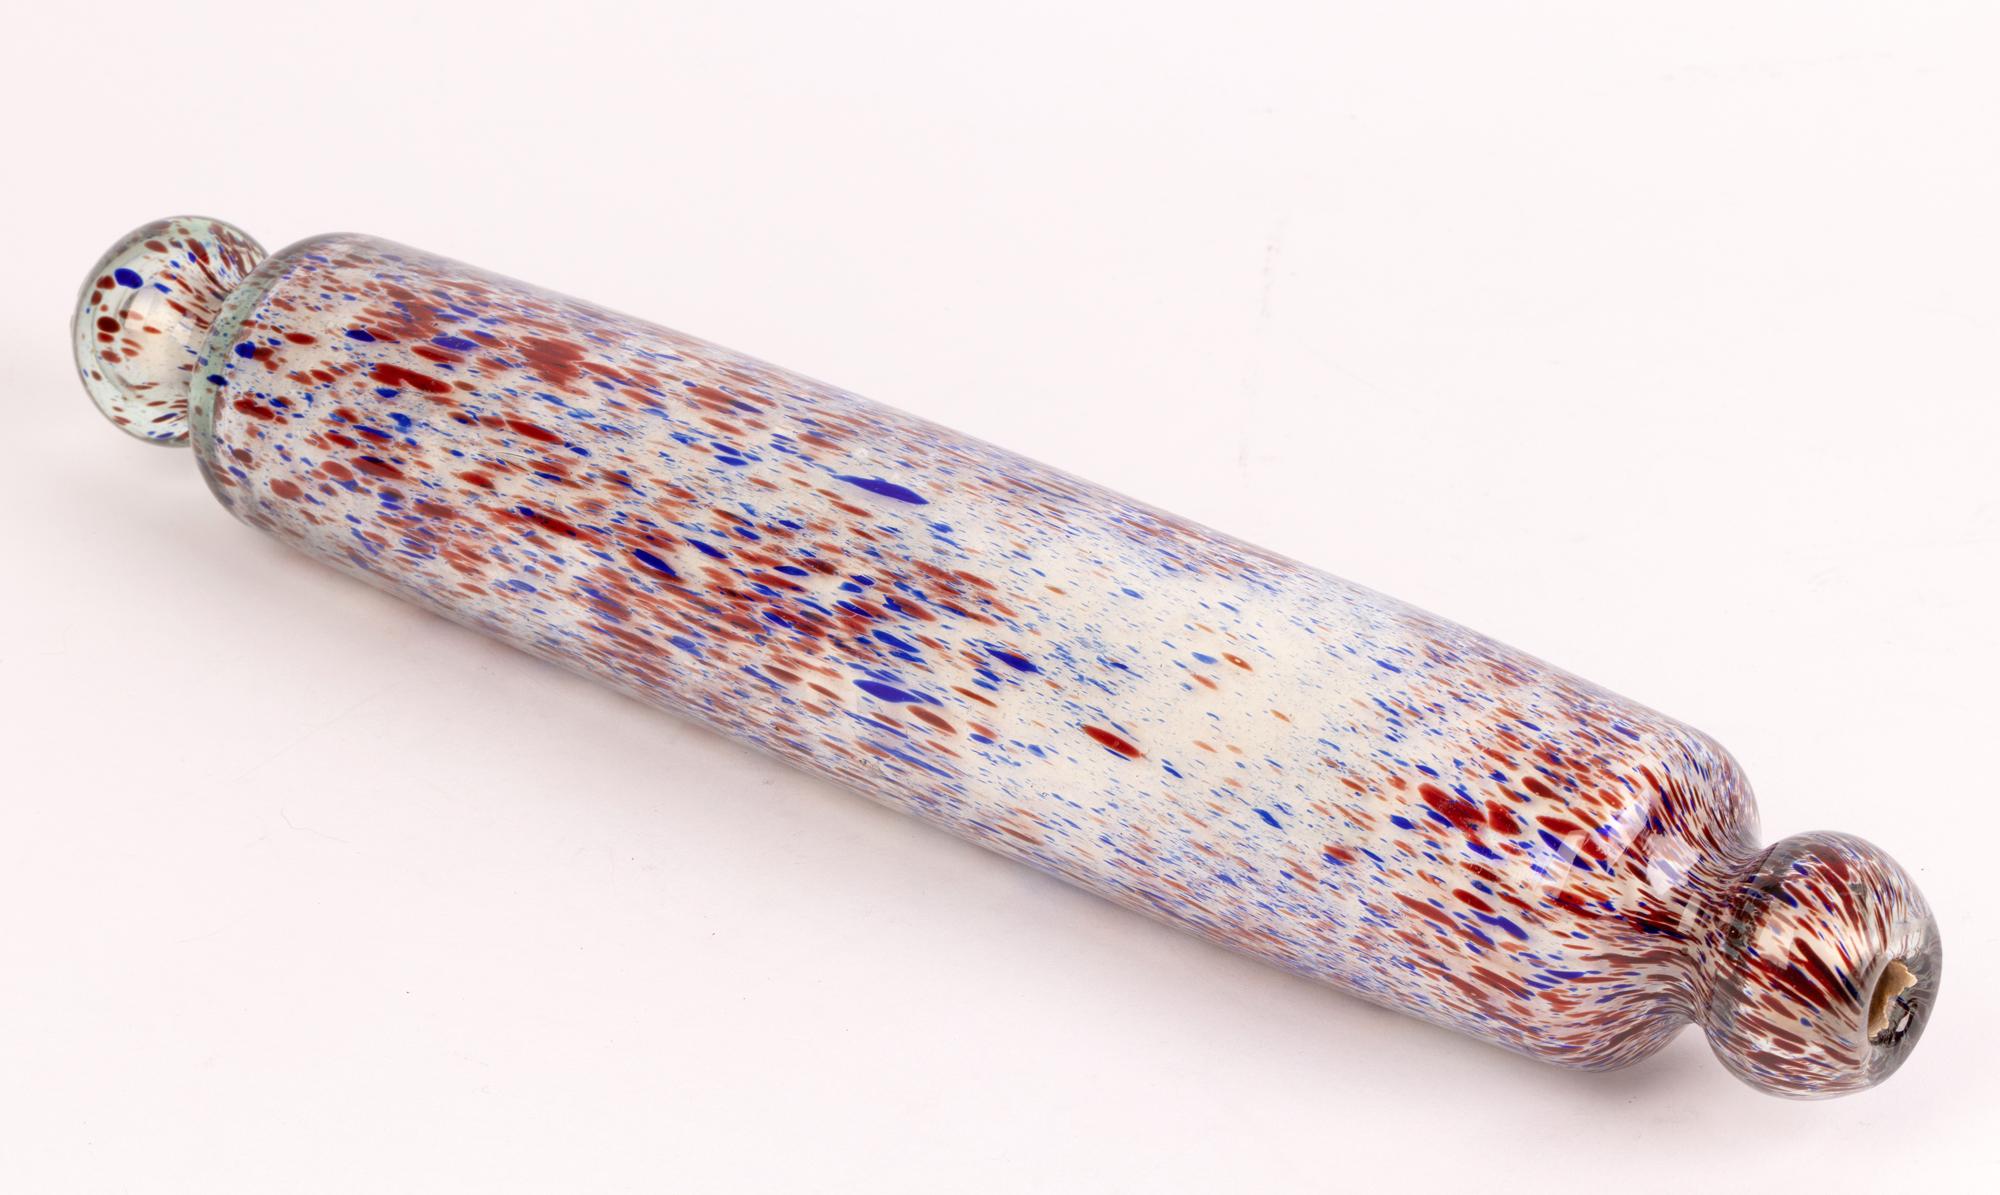 Nailsea Hand-Blown Antique Glass Rolling Pin with Colored Inclusions In Good Condition For Sale In Bishop's Stortford, Hertfordshire